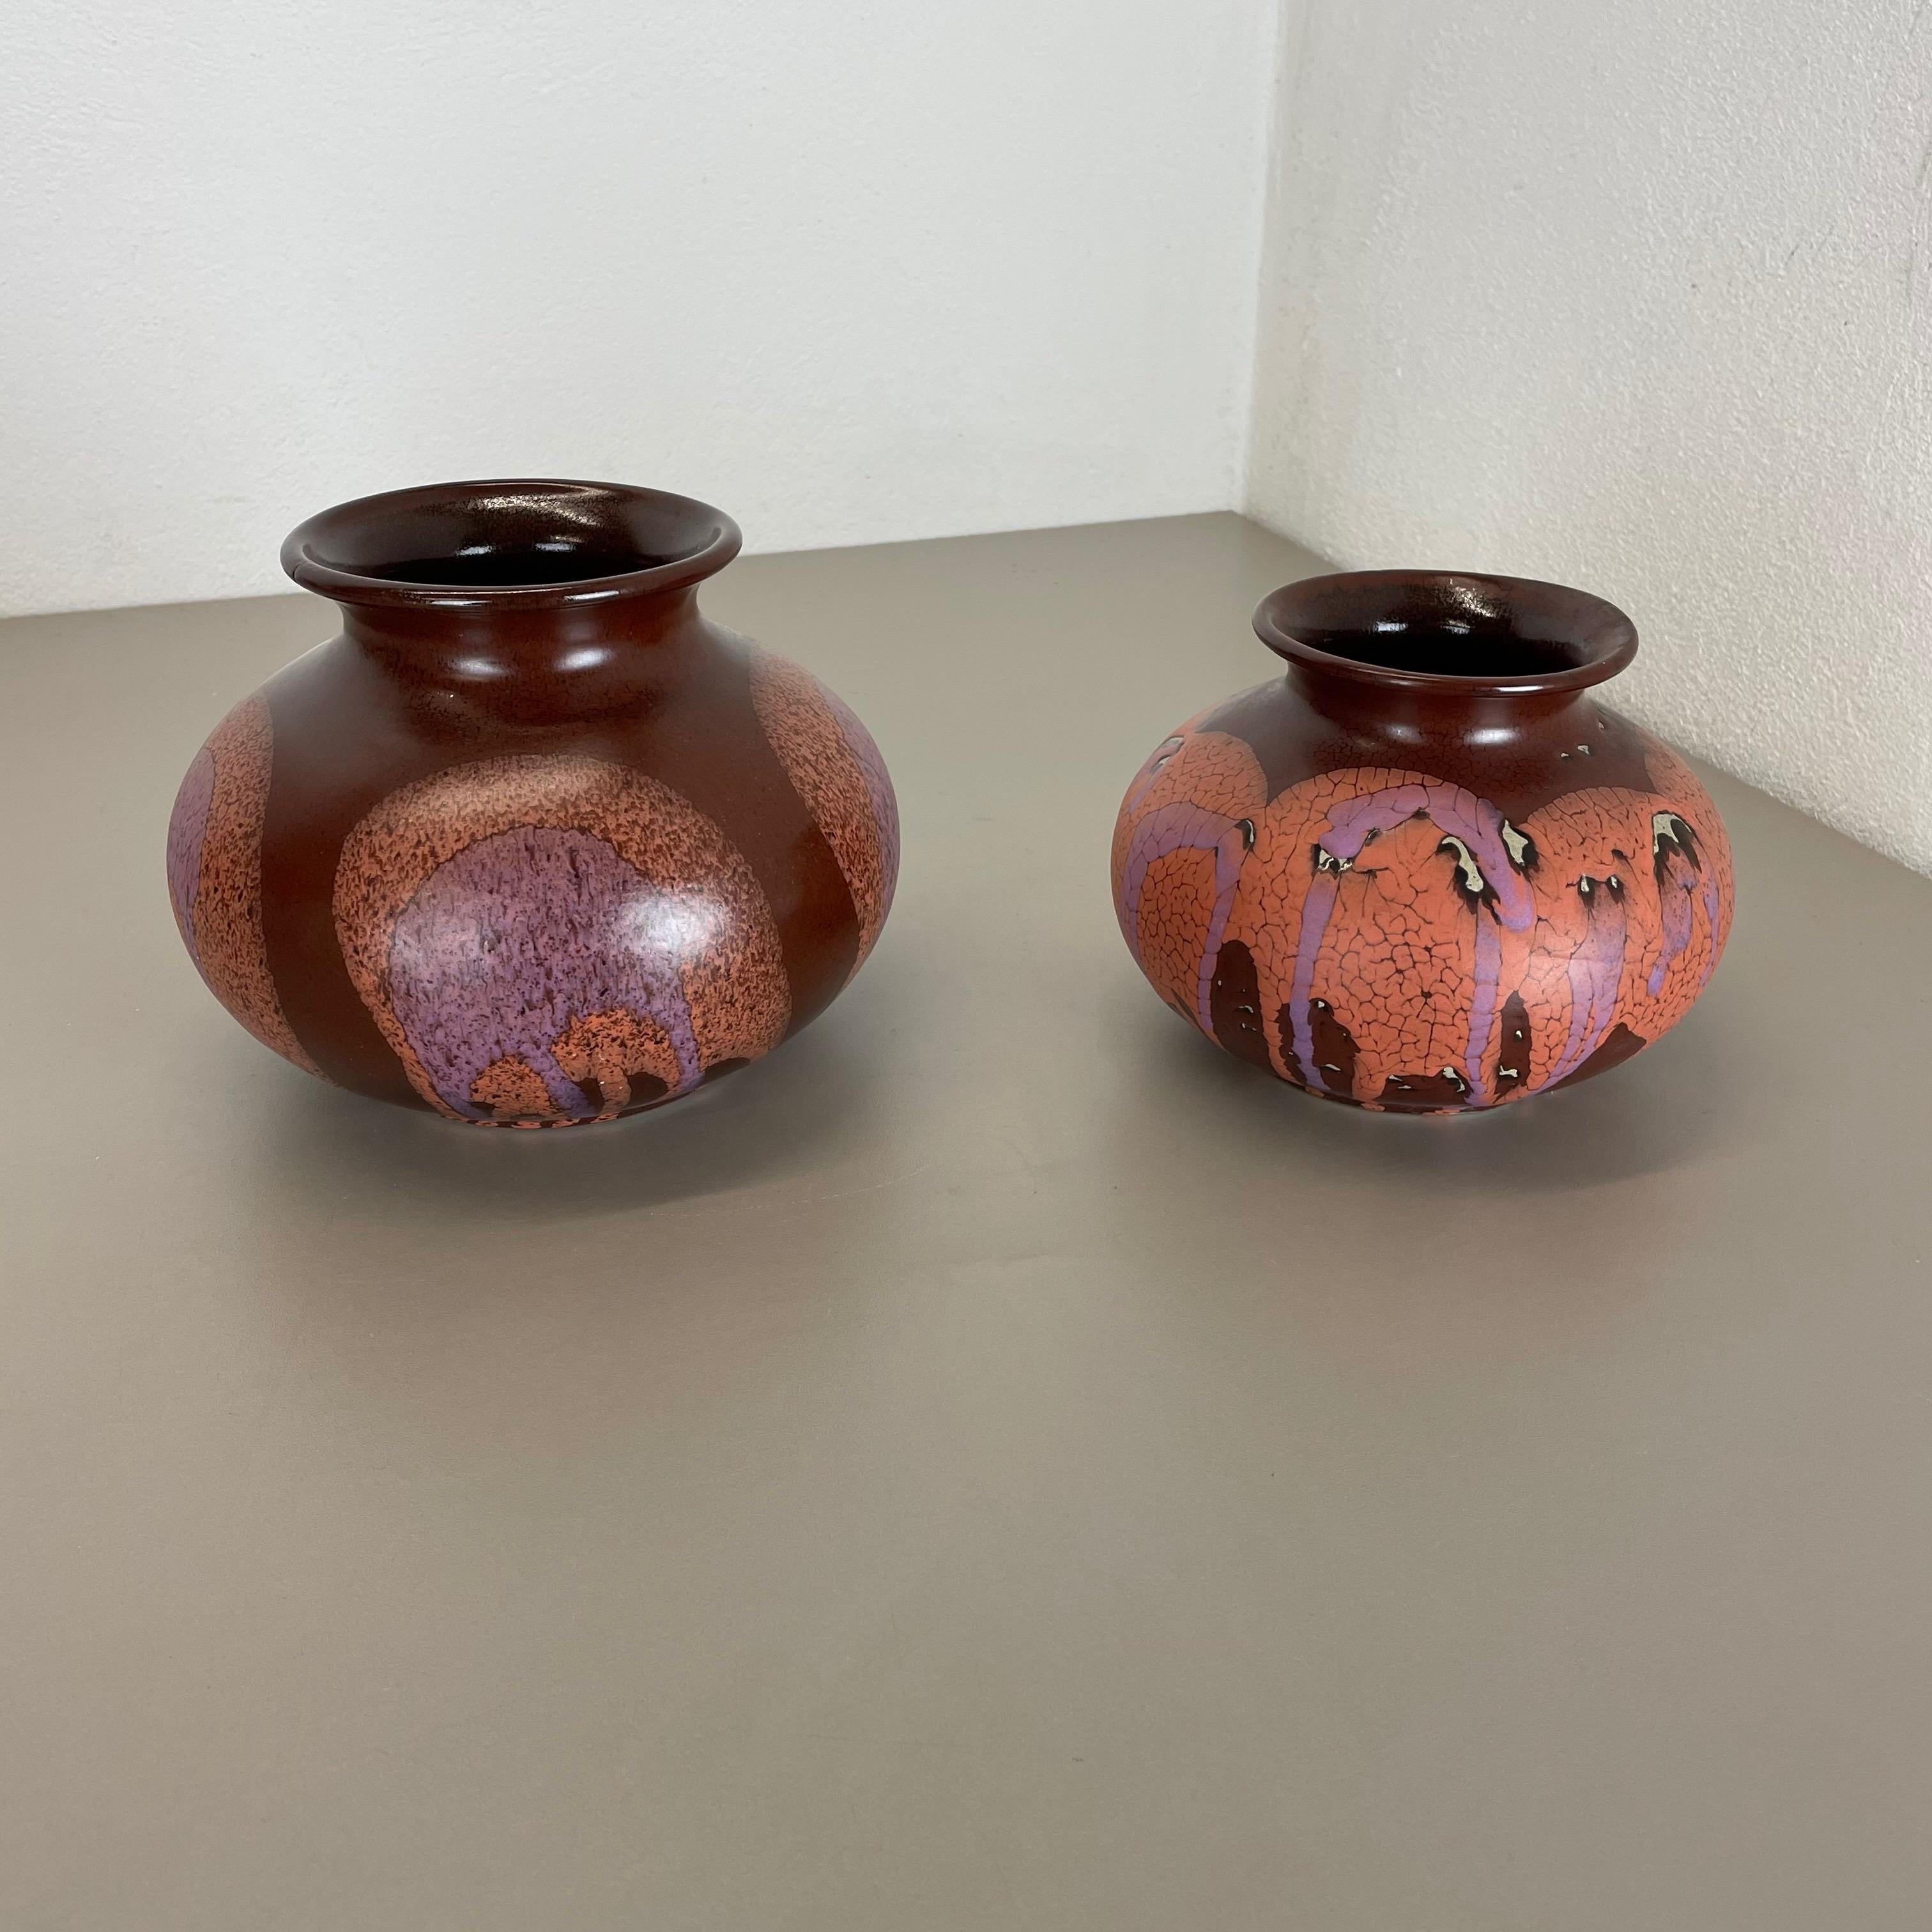 Article:

Set of two ceramic vase elements


Producer:

Steuler, Germany



Decade:

1970s


Description:

These original vintage Vase was produced in the 1970s in Germany. It is made of ceramic pottery in brown tone. Super rare in